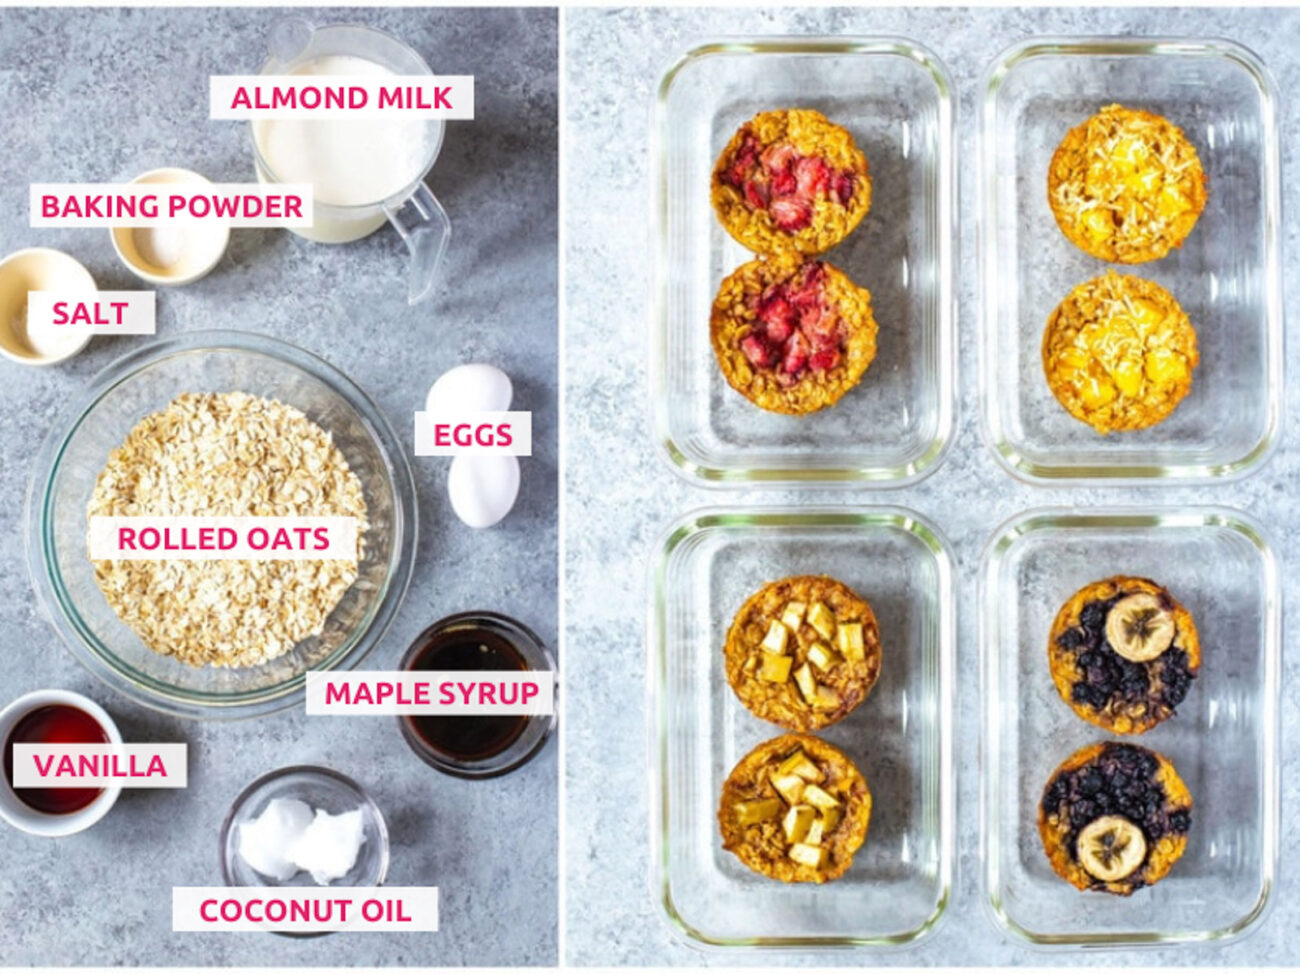 Ingredients for baked oatmeal cups: rolled oats, almond milk, baking powder, salt, eggs, vanilla, coconut oil and maple syrup.